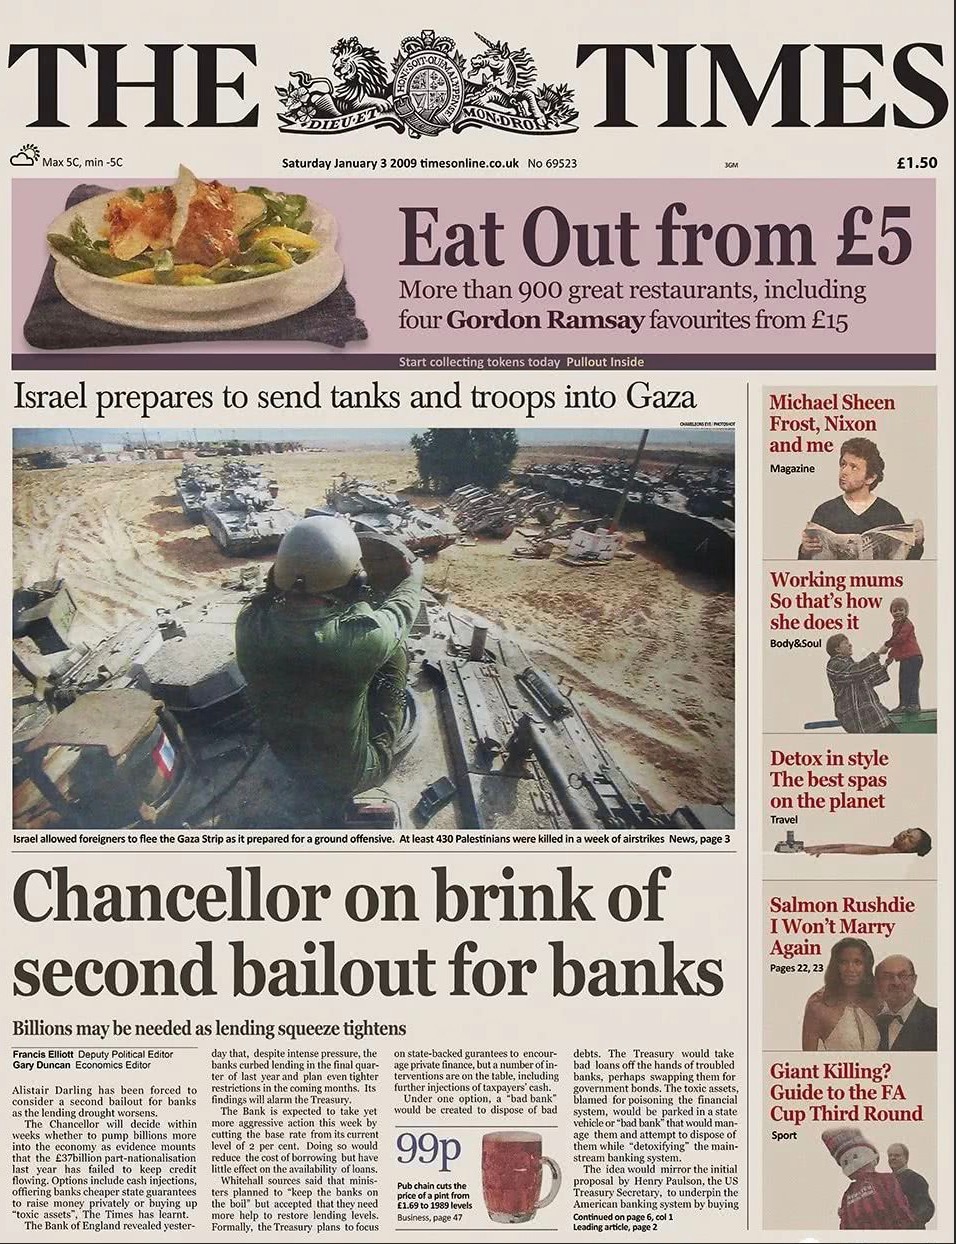 The Times, Chancellor on brink of second bailout for banks